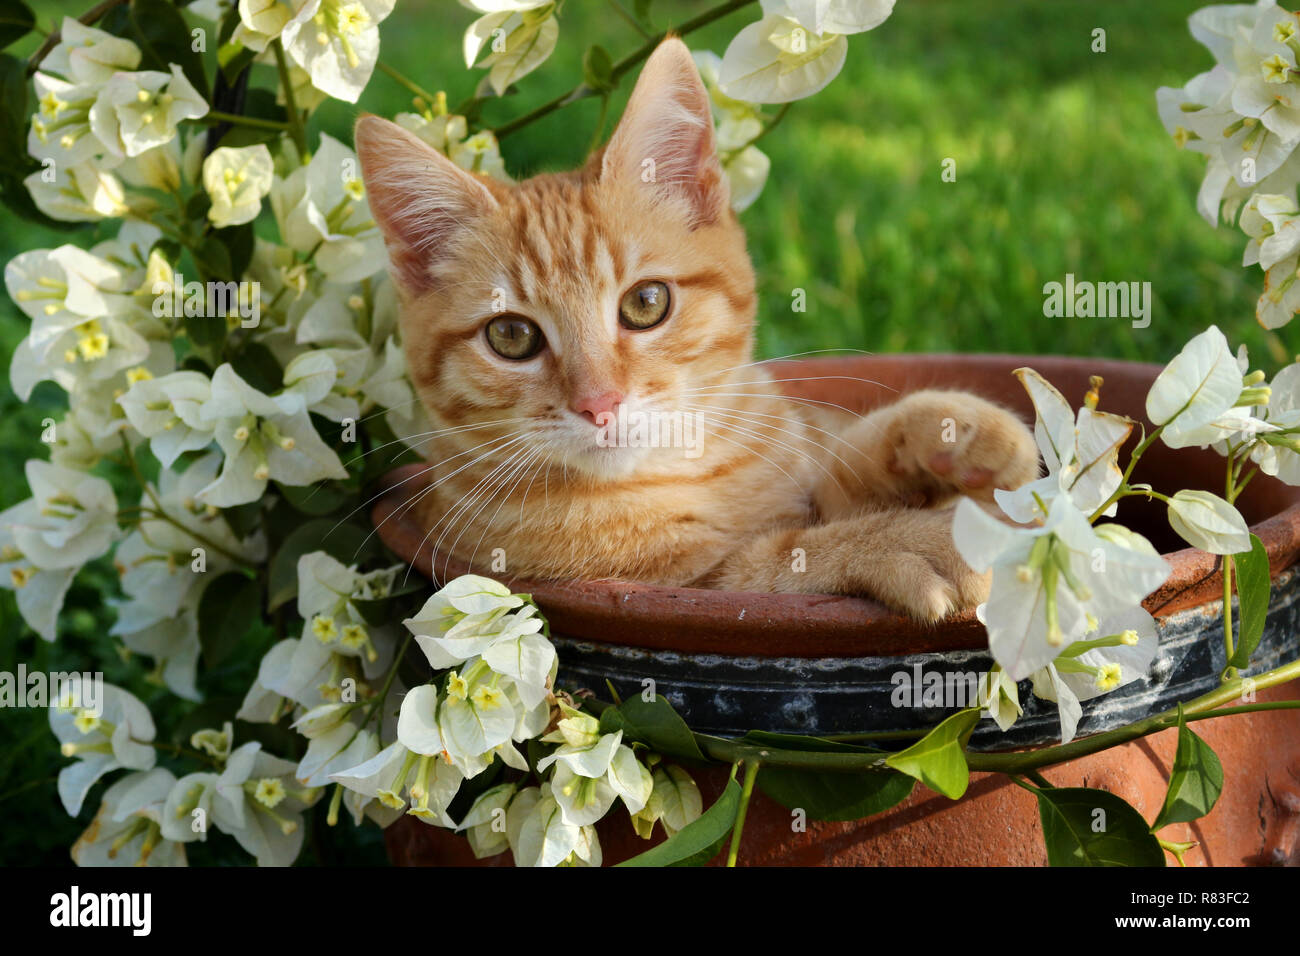 young ginger cat, 3 month old, lying in a flower pot with white bougainvillea Stock Photo